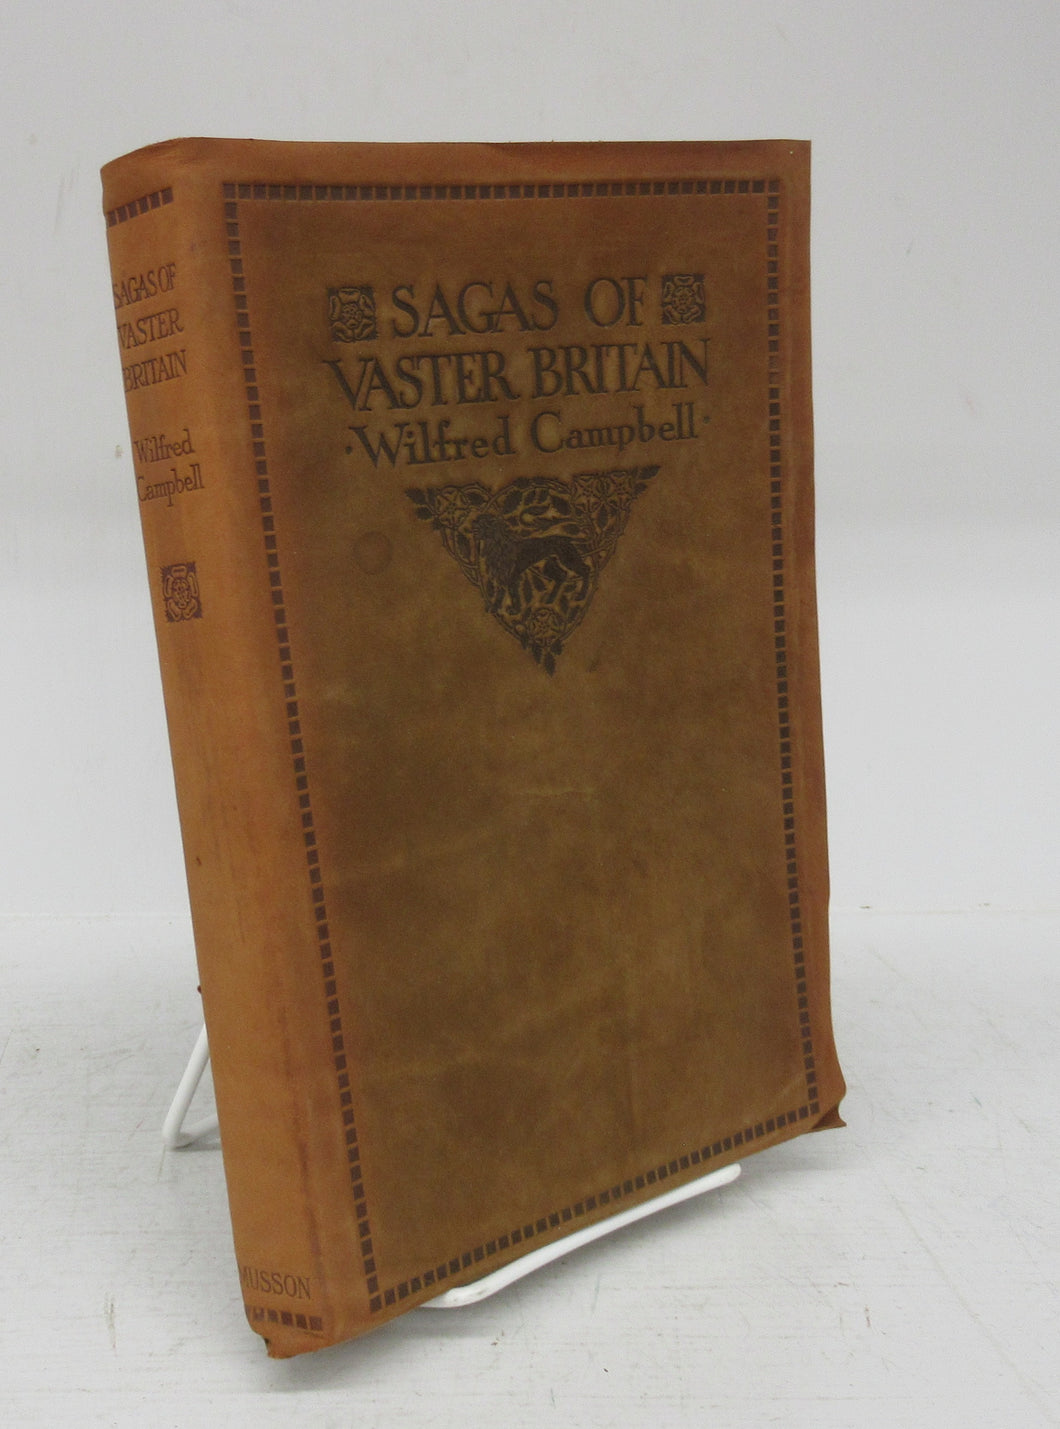 Sagas of Vaster Britain: Poems of the Race, the Empire and the Divinity of Man